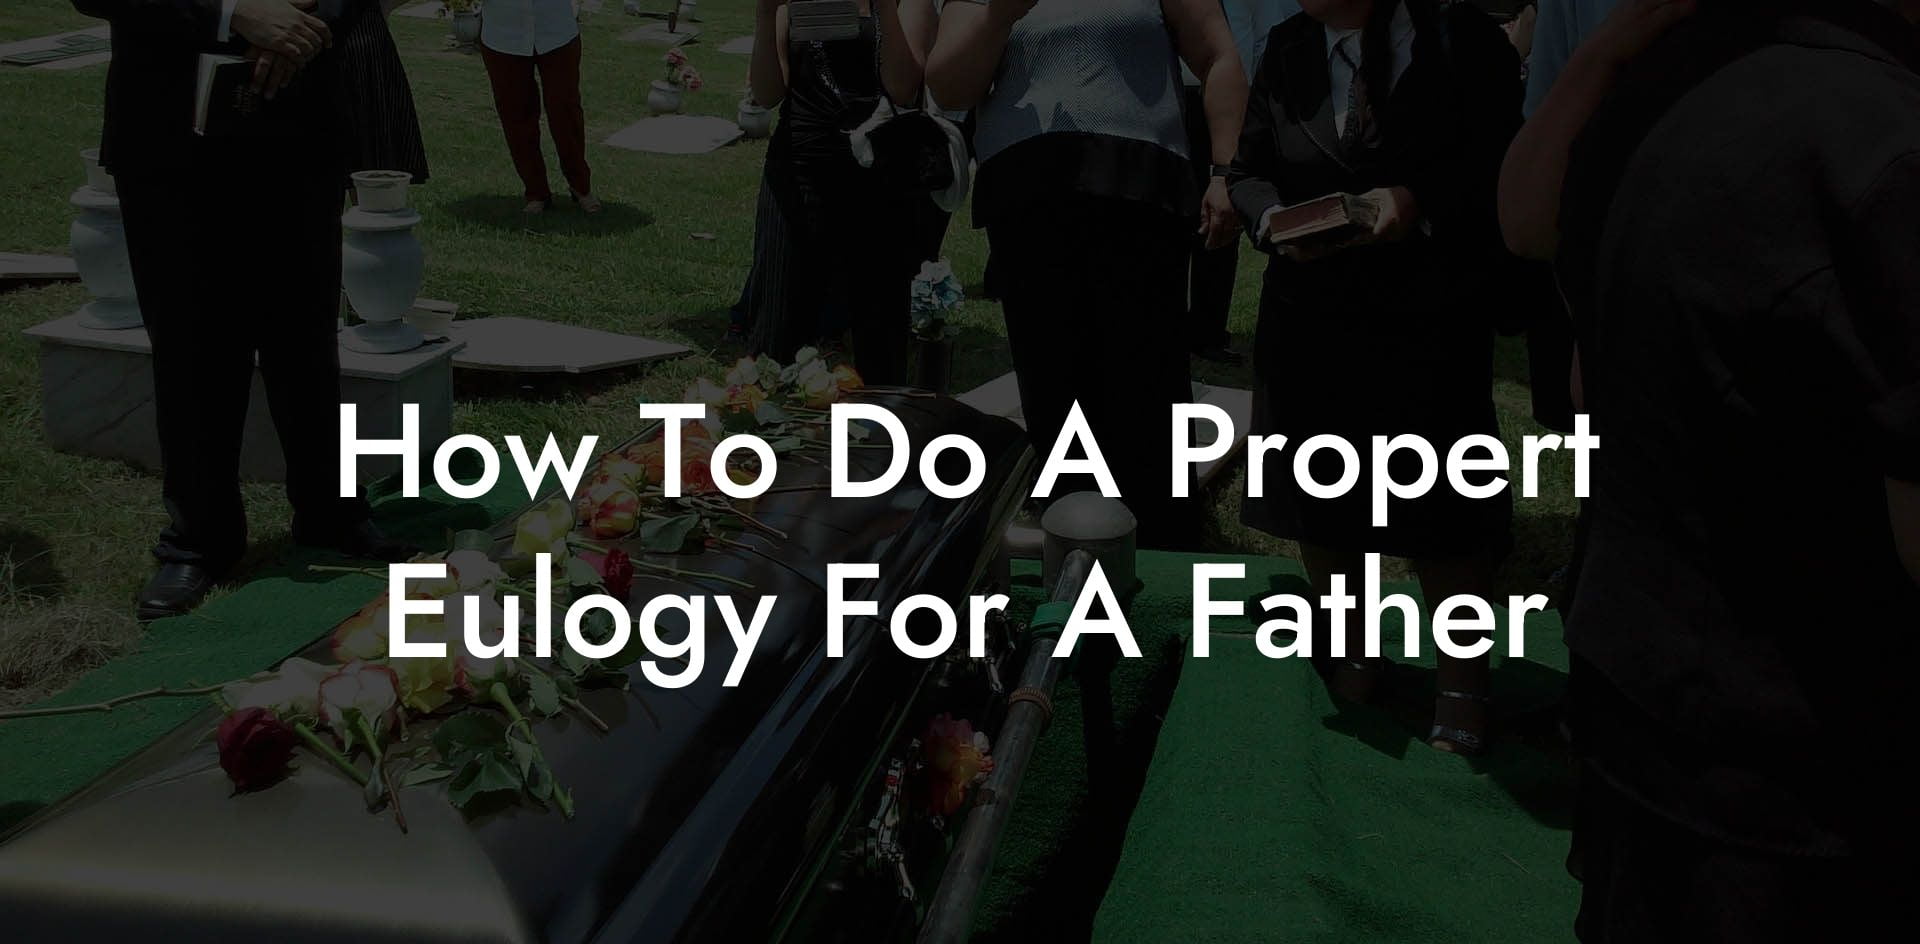 How To Do A Propert Eulogy For A Father